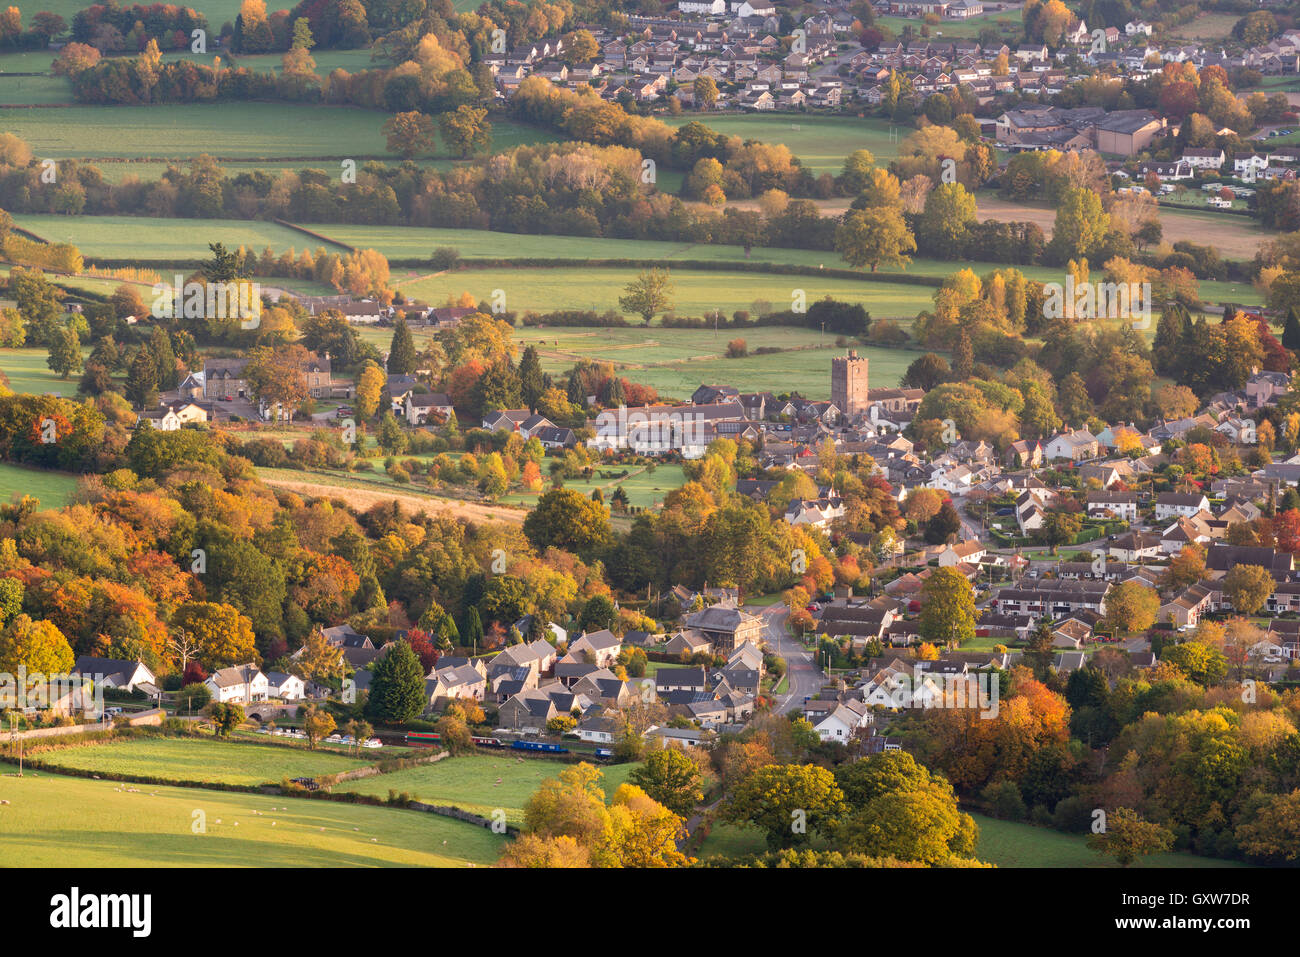 Llangattock village surrounded by autumnal foliage, Crickhowell, Brecon Beacons, Powys, Wales. Autumn (October) 2015. Stock Photo